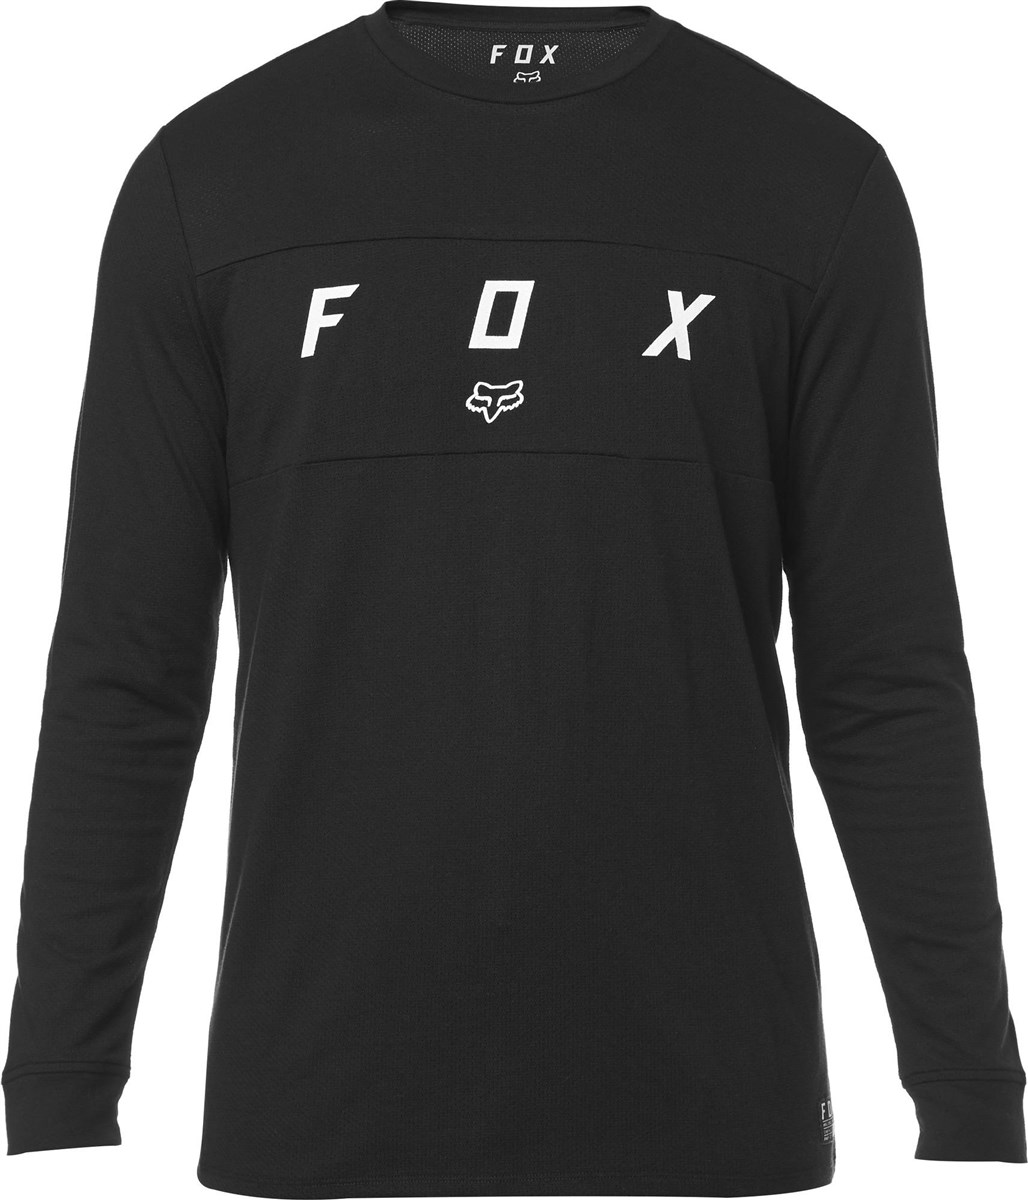 Fox Clothing Slyder Long Sleeve Knit Tee product image